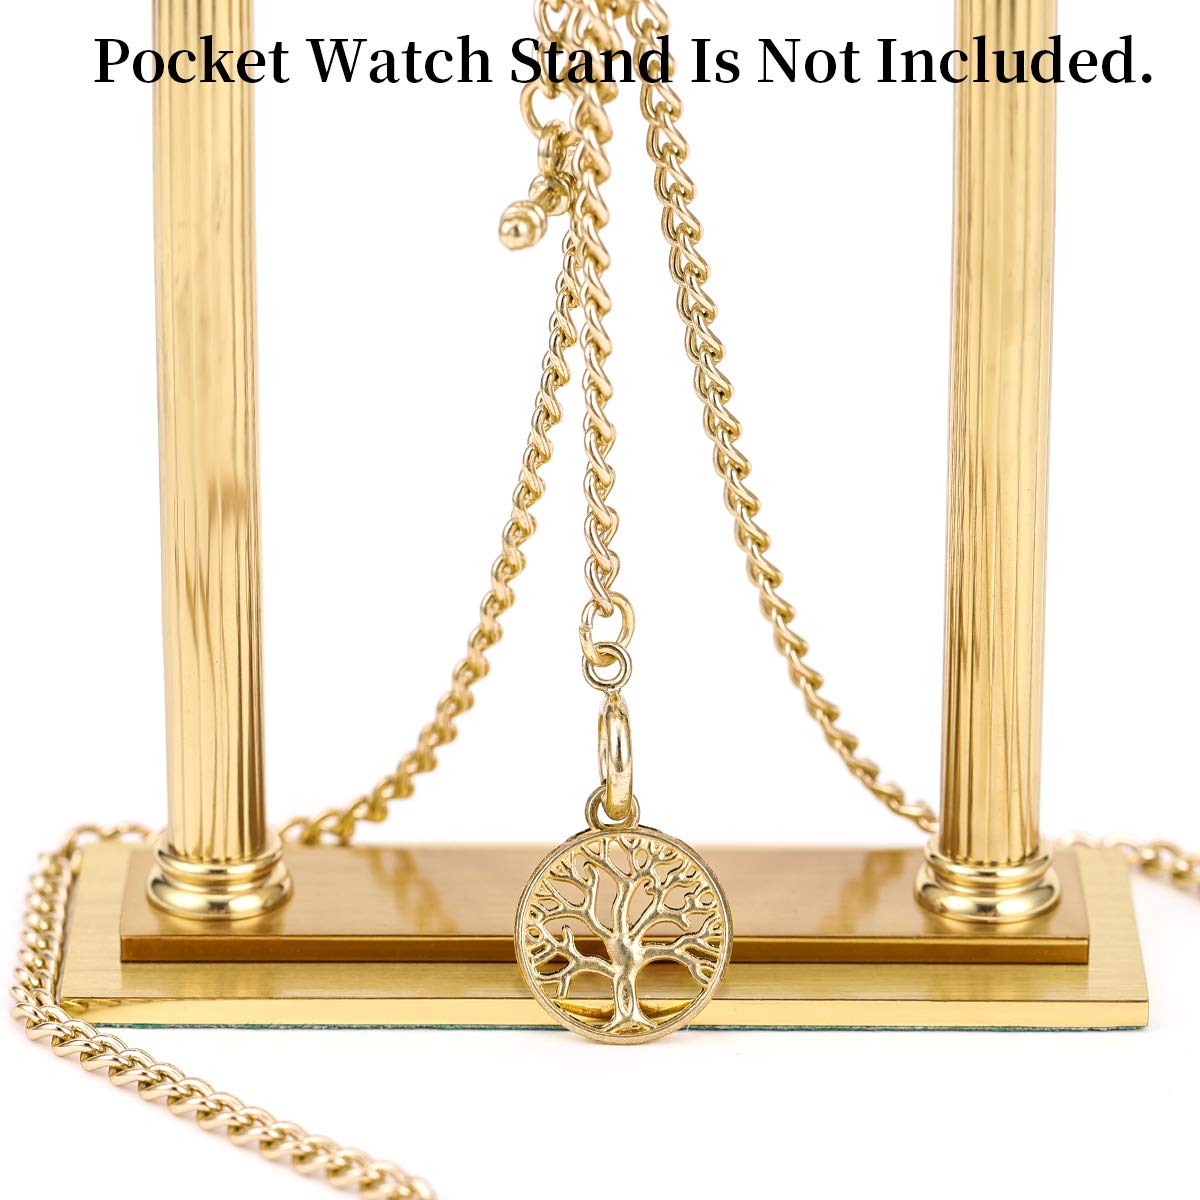 ManChDa Double Albert Chain Pocket Watch, Curb Link Chain 3 Hook Antique Plating Shield Design Fob T Bar for Men with Life Tree Pendant